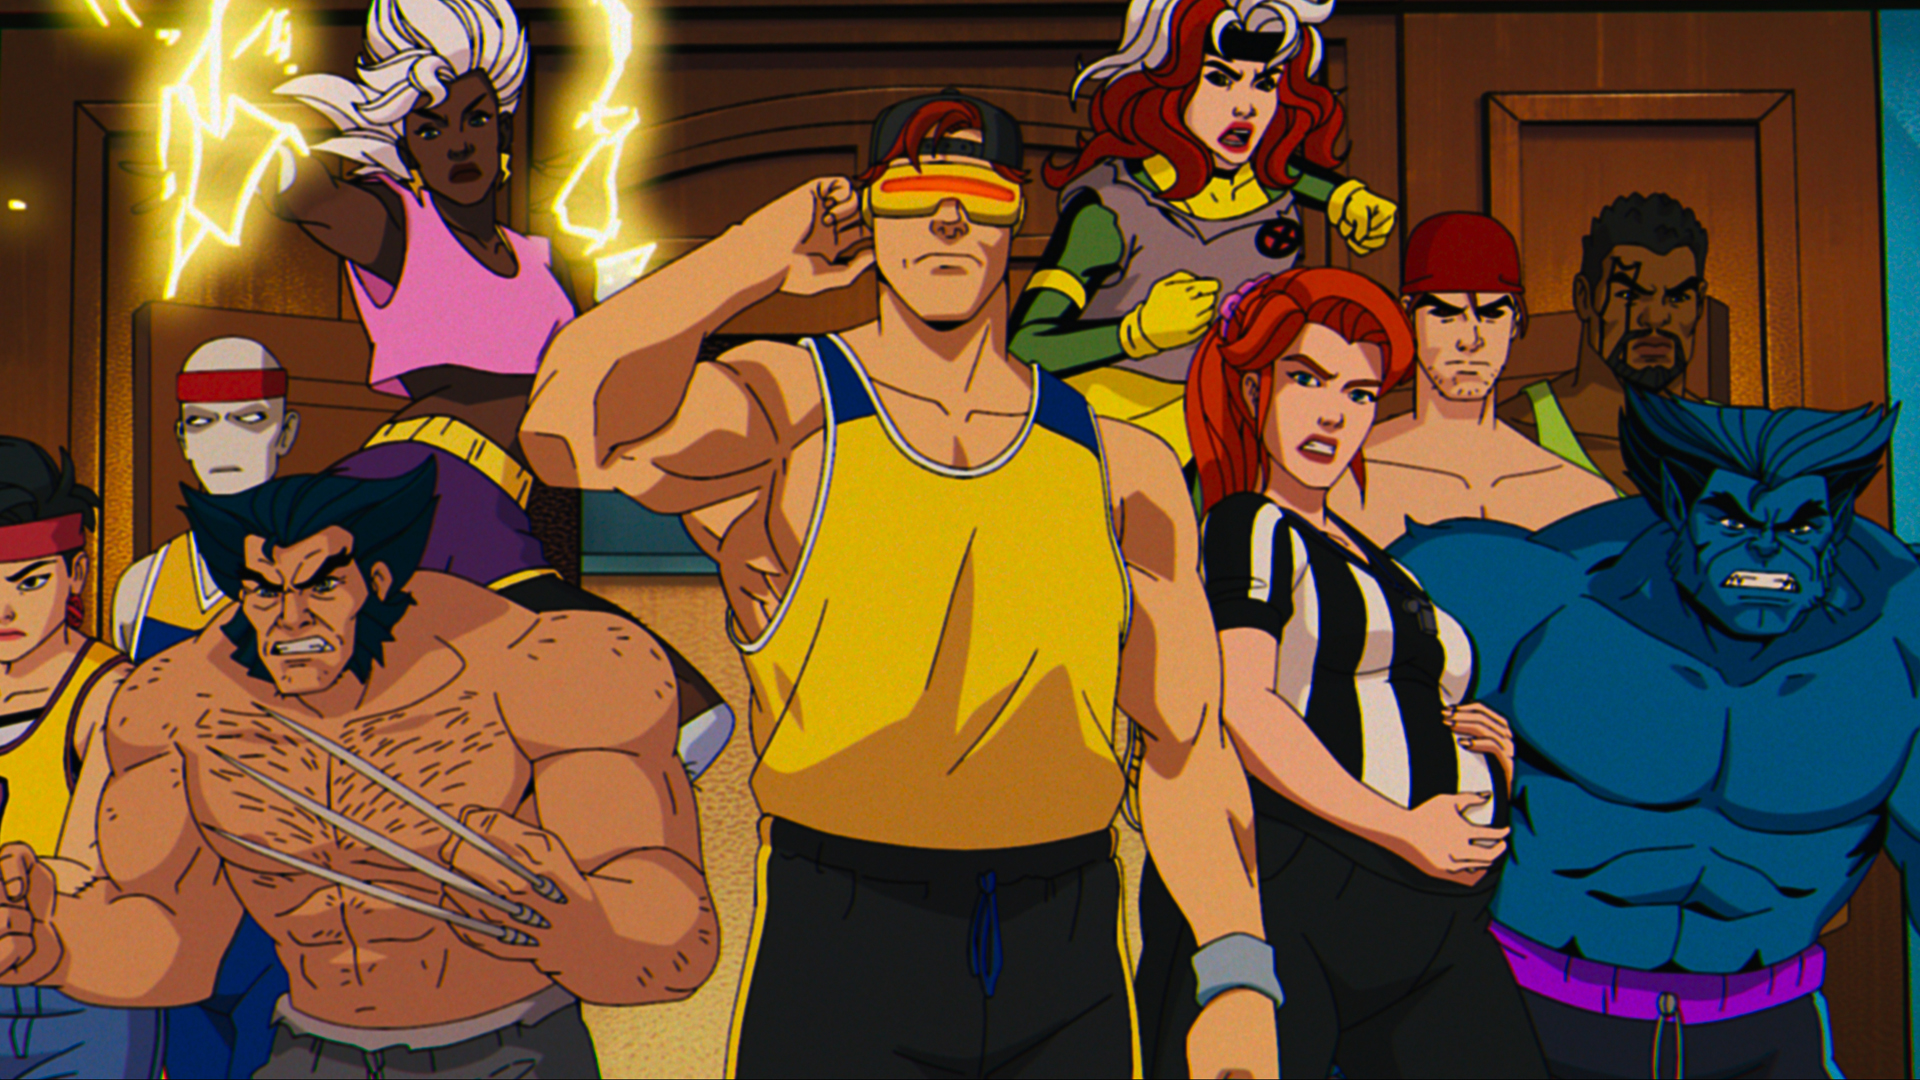 The cast of X-Men 97 burst through a set of double doors in the Disney Plus animated show